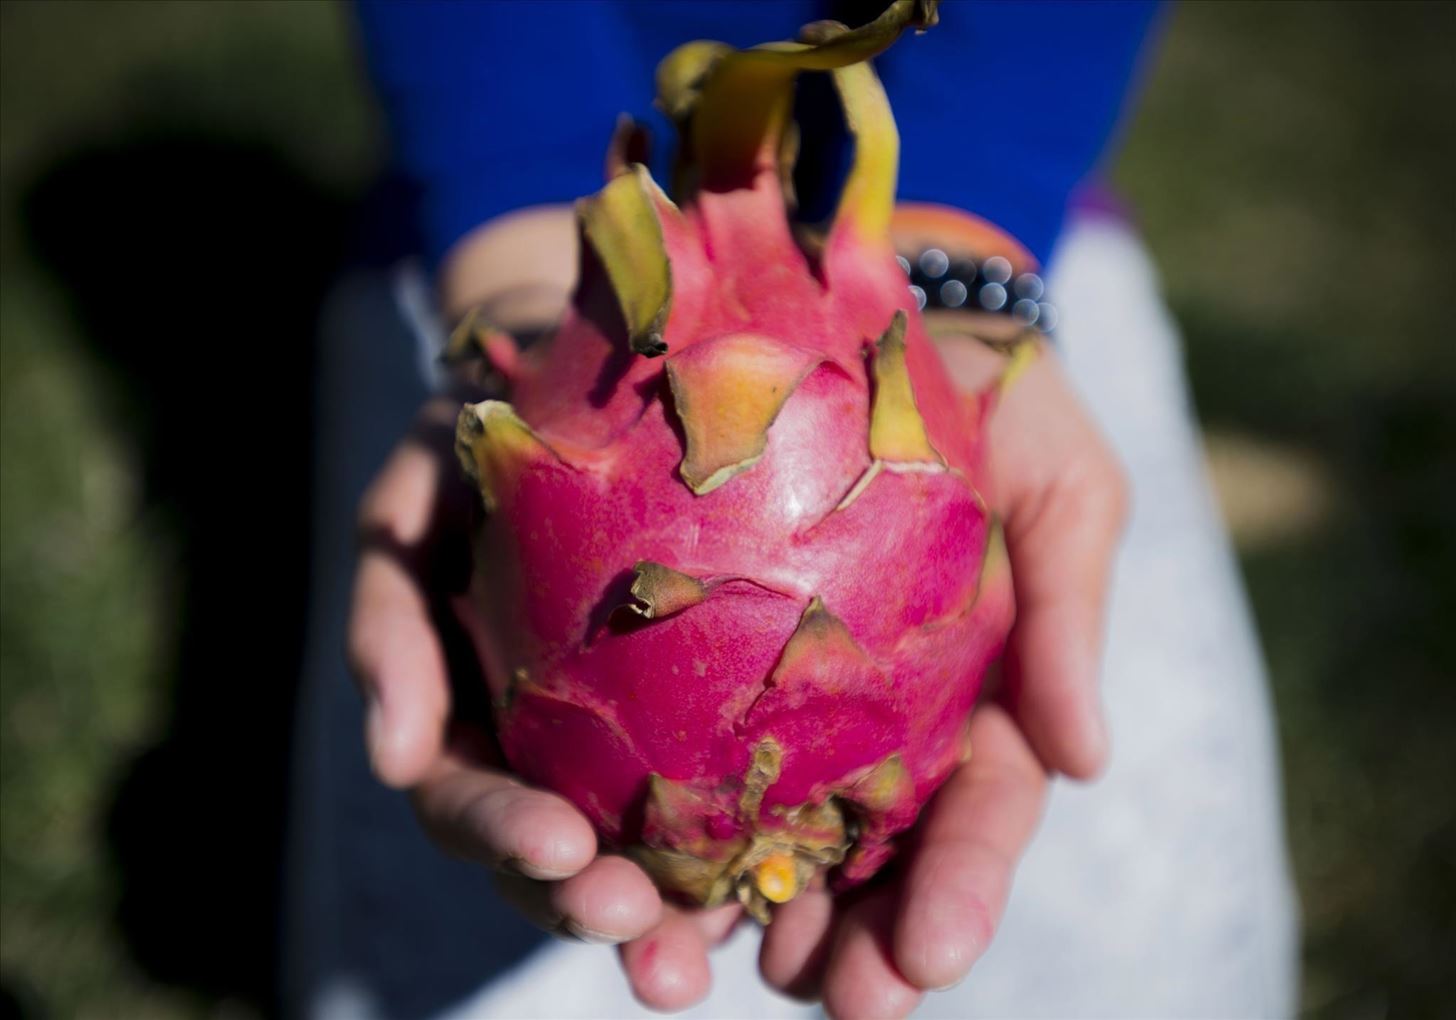 Weird Ingredient Wednesday: How to Train Your Dragonfruit